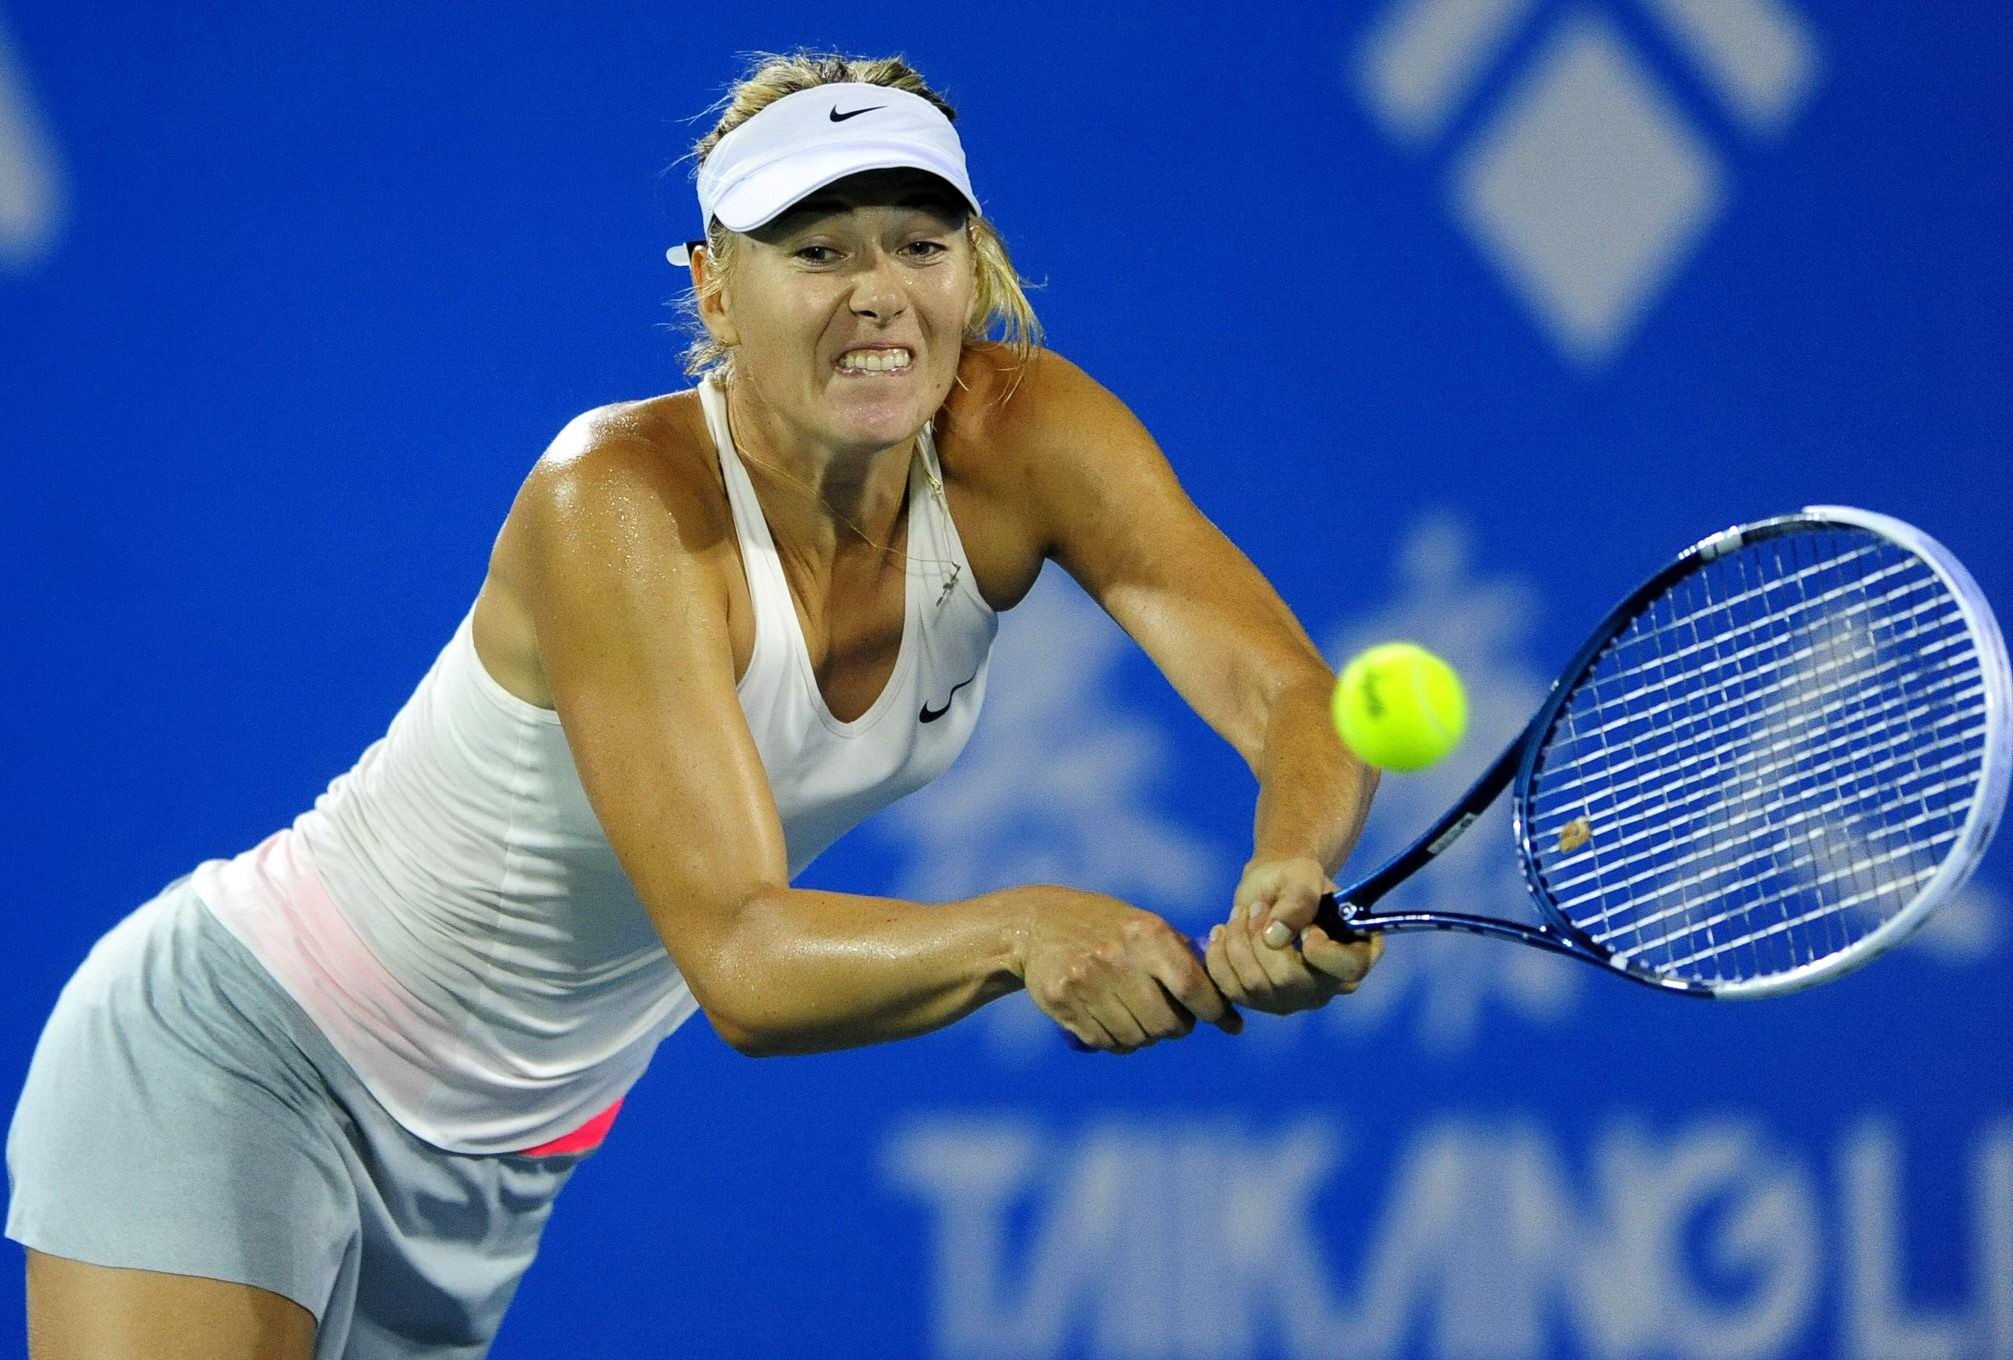 Maria Sharapova upskirt at the 2014 Dongfeng Motor Wuhan Open in China #75185009